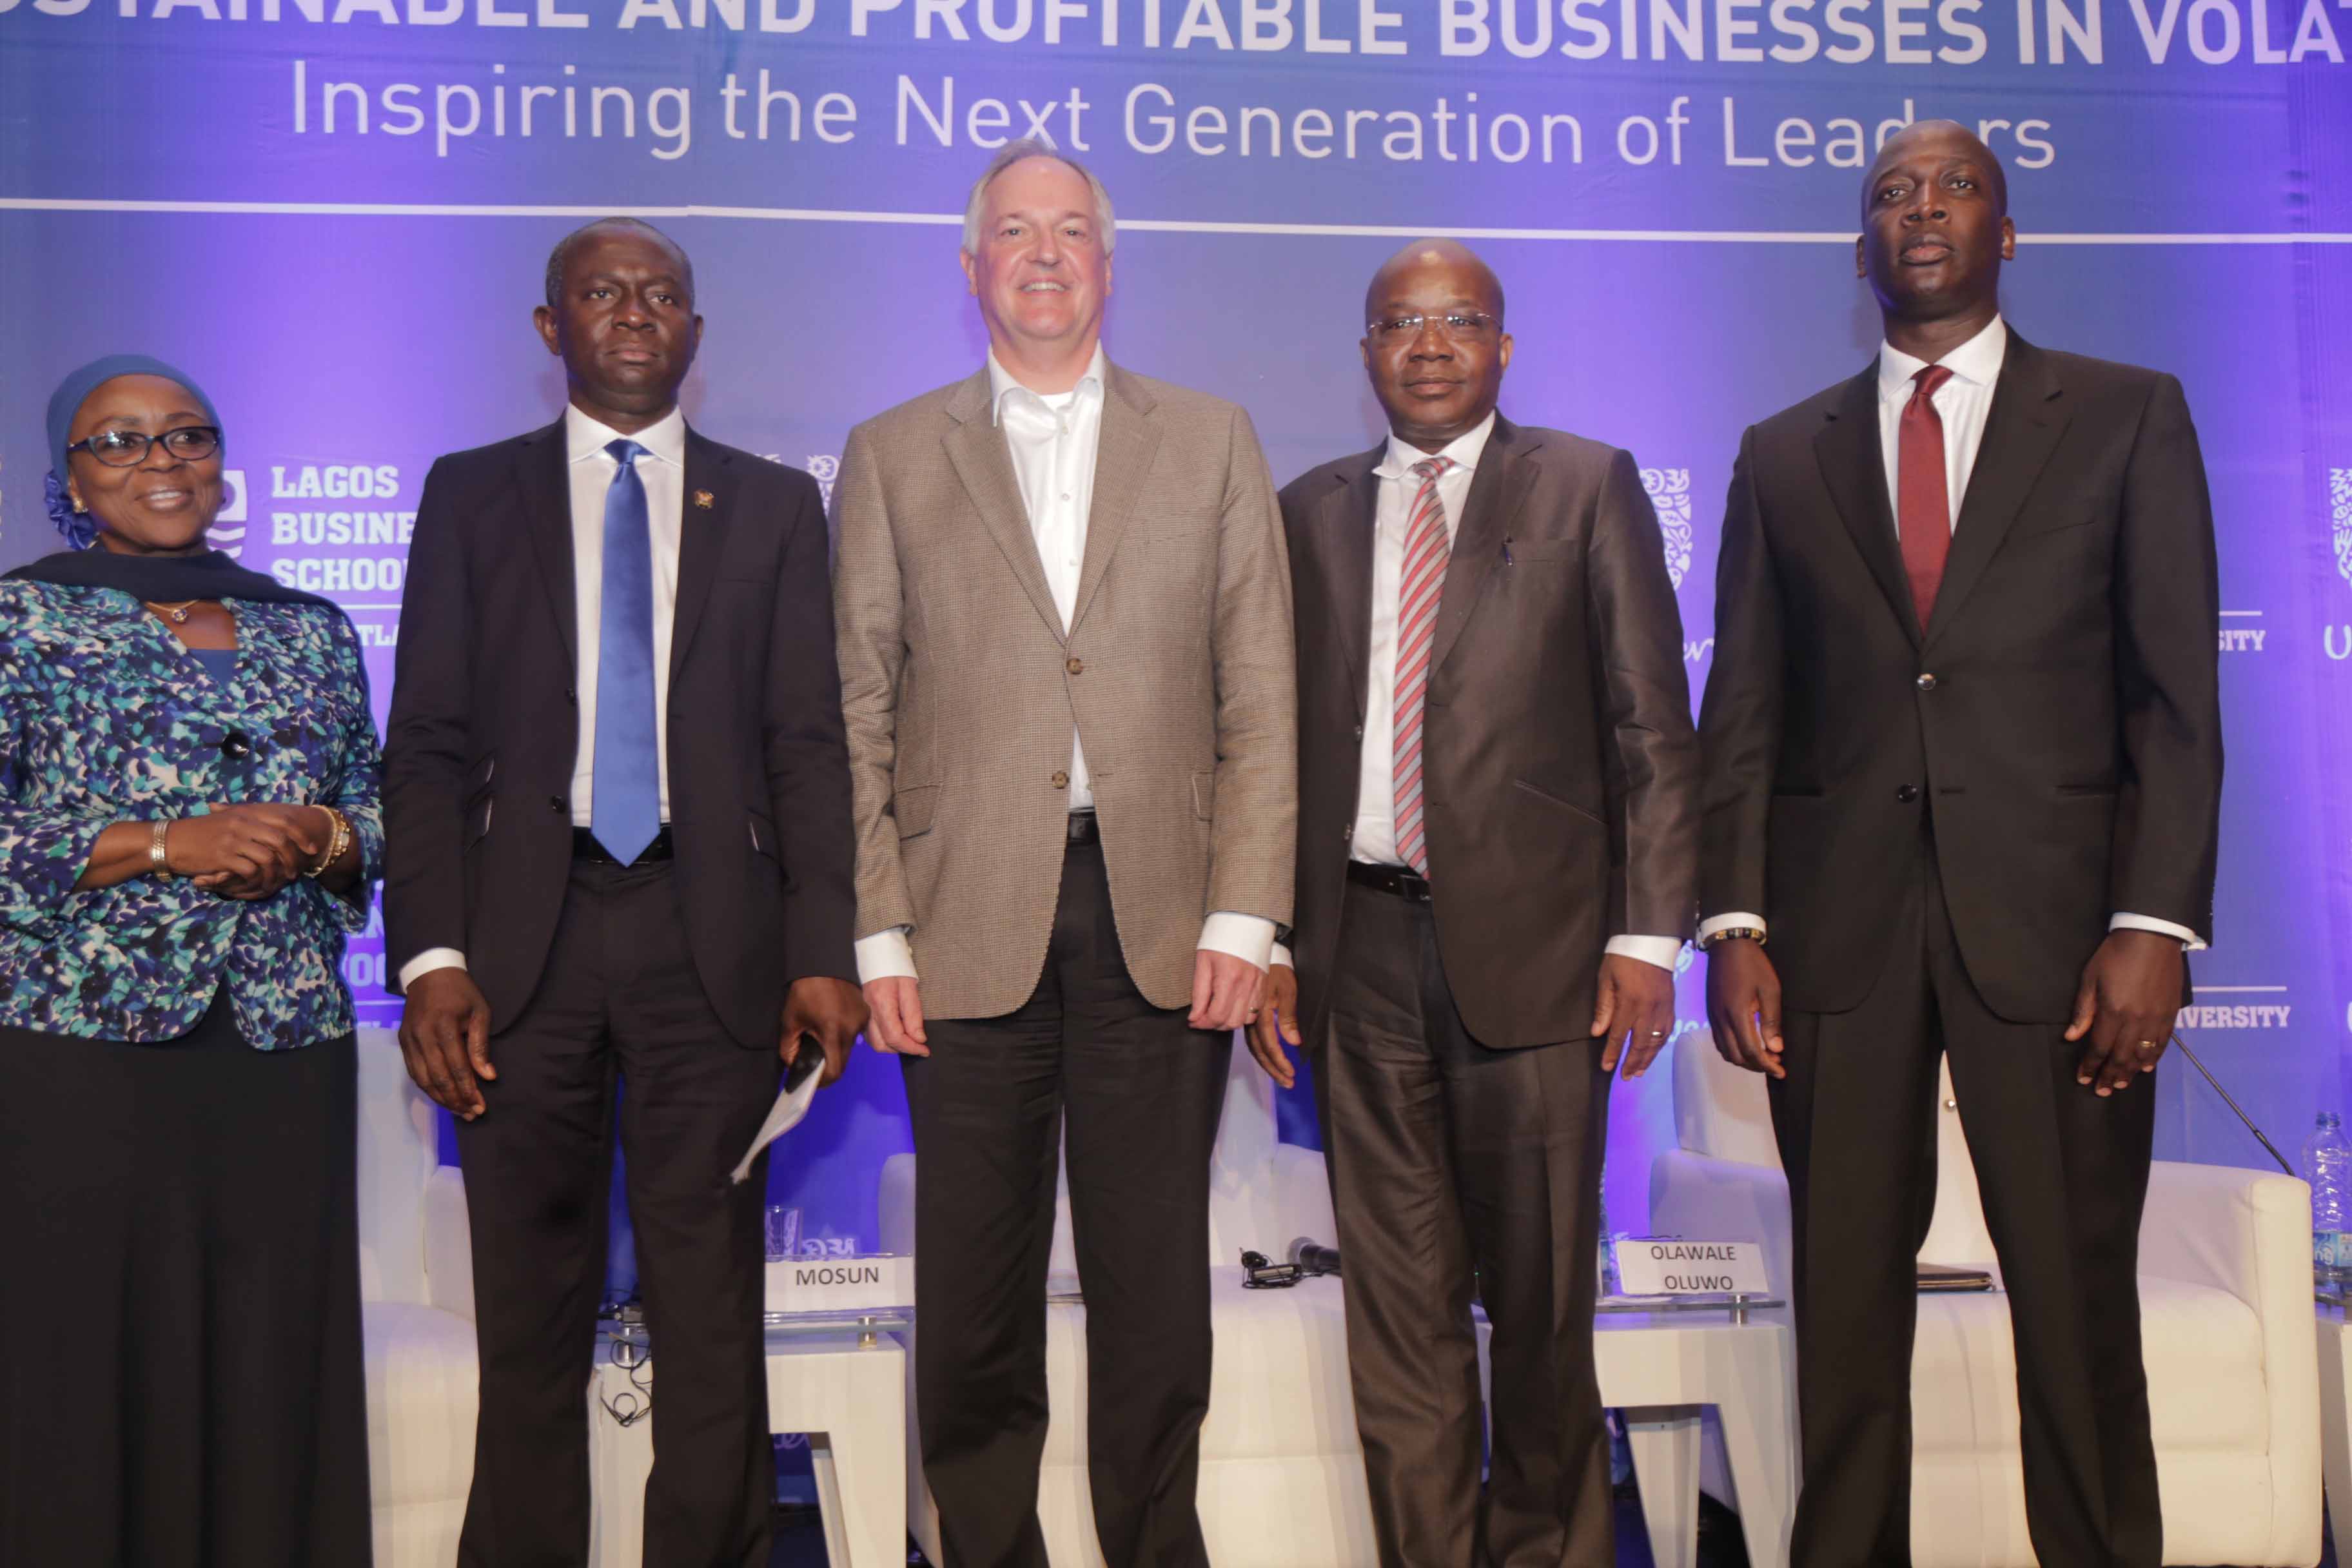 L-R: Chairperson, Access Bank Plc, Mrs. Mosun Belo-Olusoga; Commissioner for Energy and Mineral Resources Lagos, Mr. Wale Oluwo; Unilever Global CEO, Mr. Paul Polman; Chairman, Julius Berger Nigeria Plc, Mr. Mutiu Sunmonu and Managing Director, Unilever Nigeria Plc, Mr. Yaw Nsarkoh during an interactive session with Paul Polman, Global CEO, Unilever Plc, tagged: Building Sustainable and Profitable Businesses in Volatile Times.